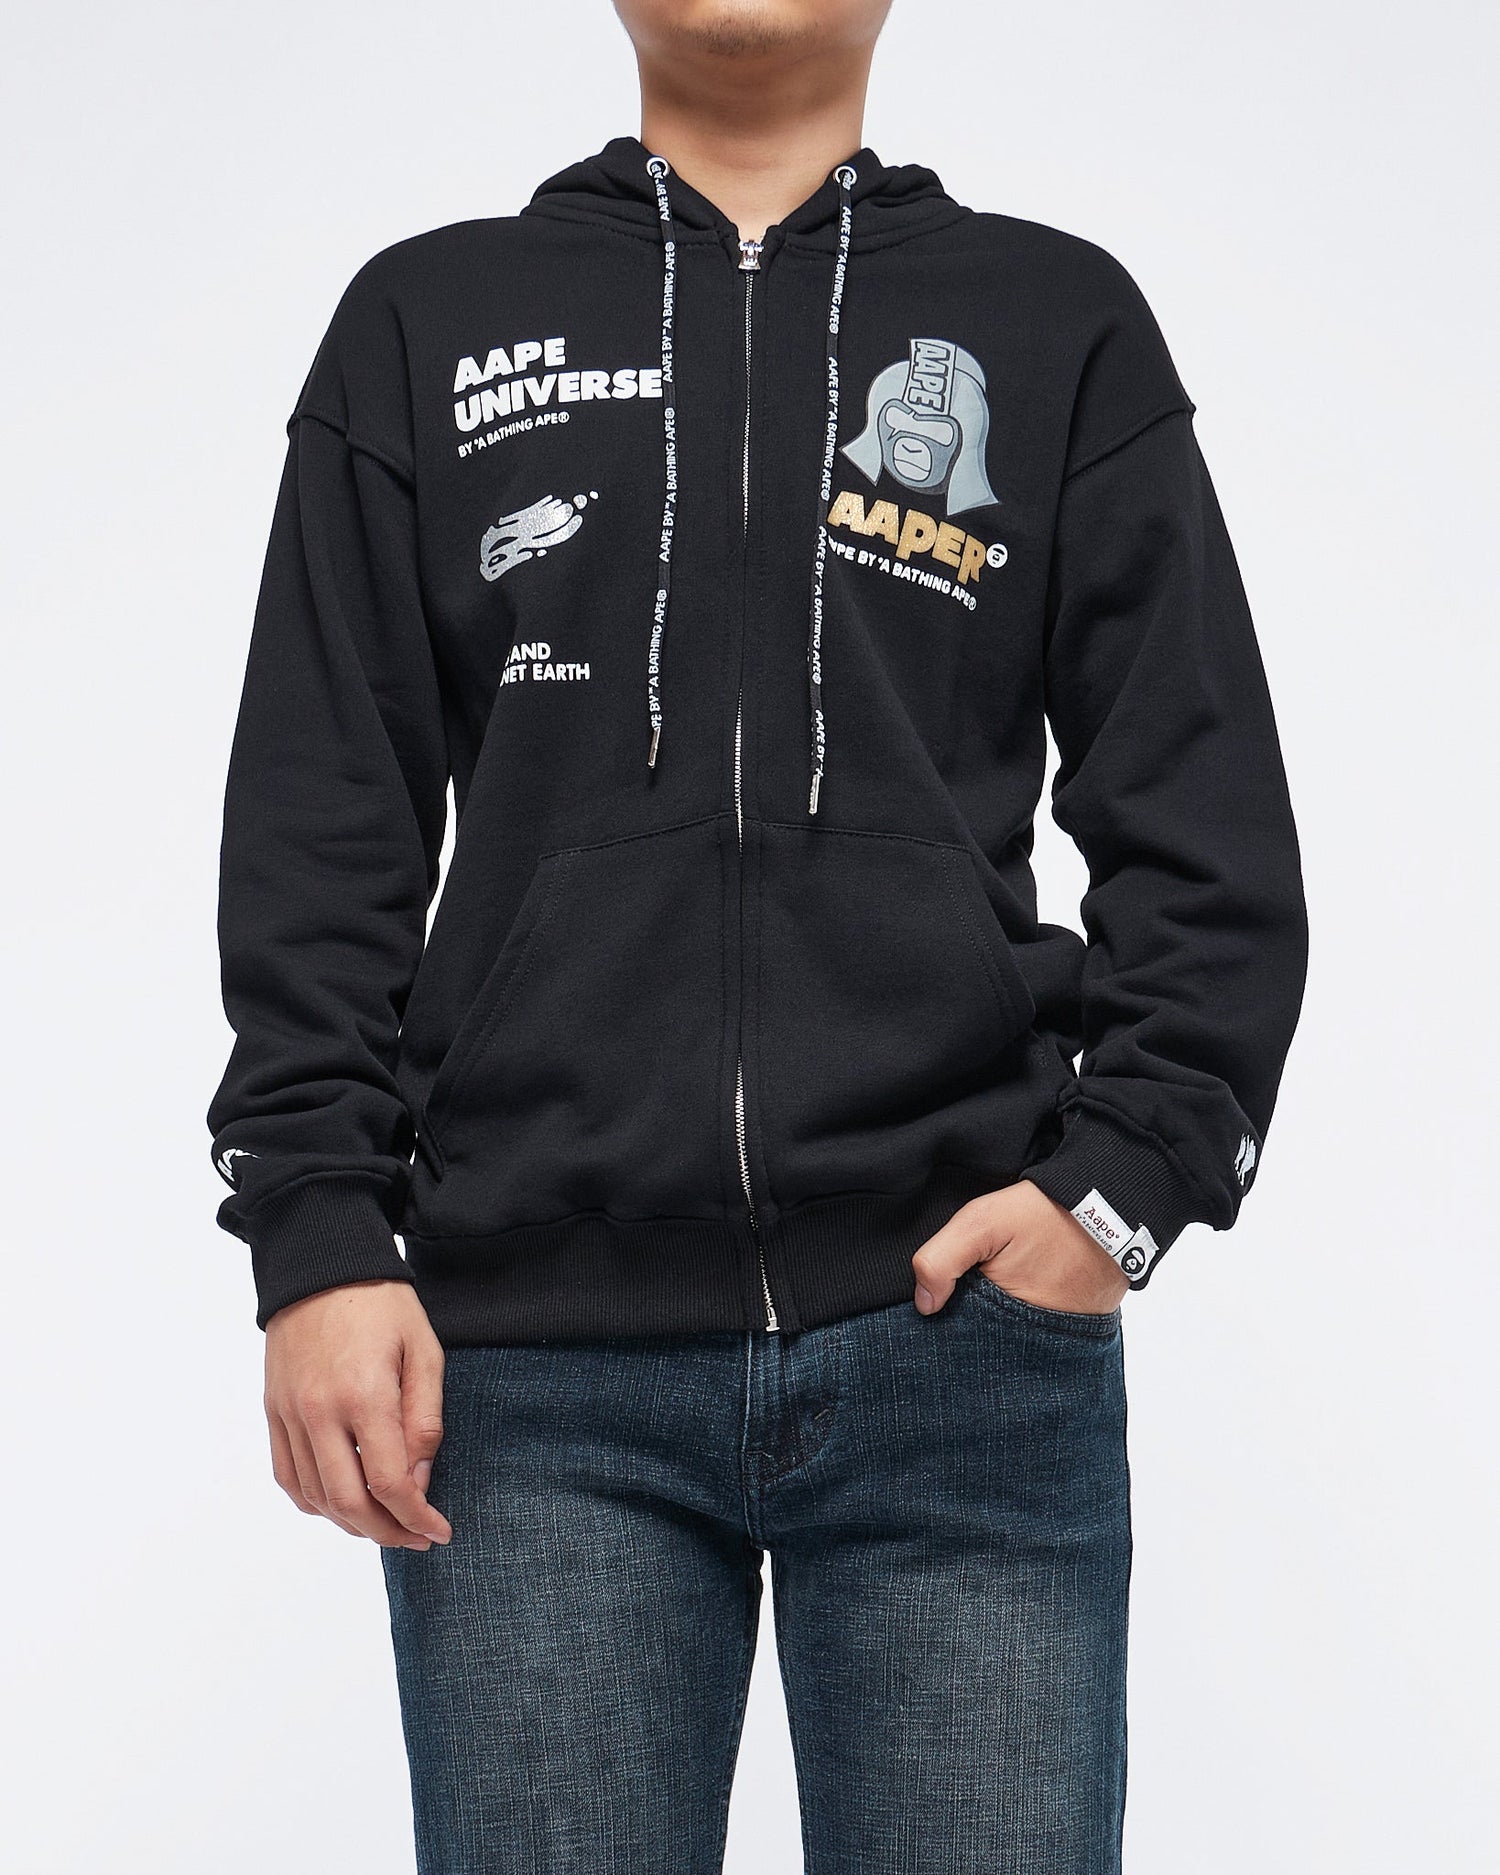 MOI OUTFIT-Aape Universe Printed Men Hoodie Zipped 39.90